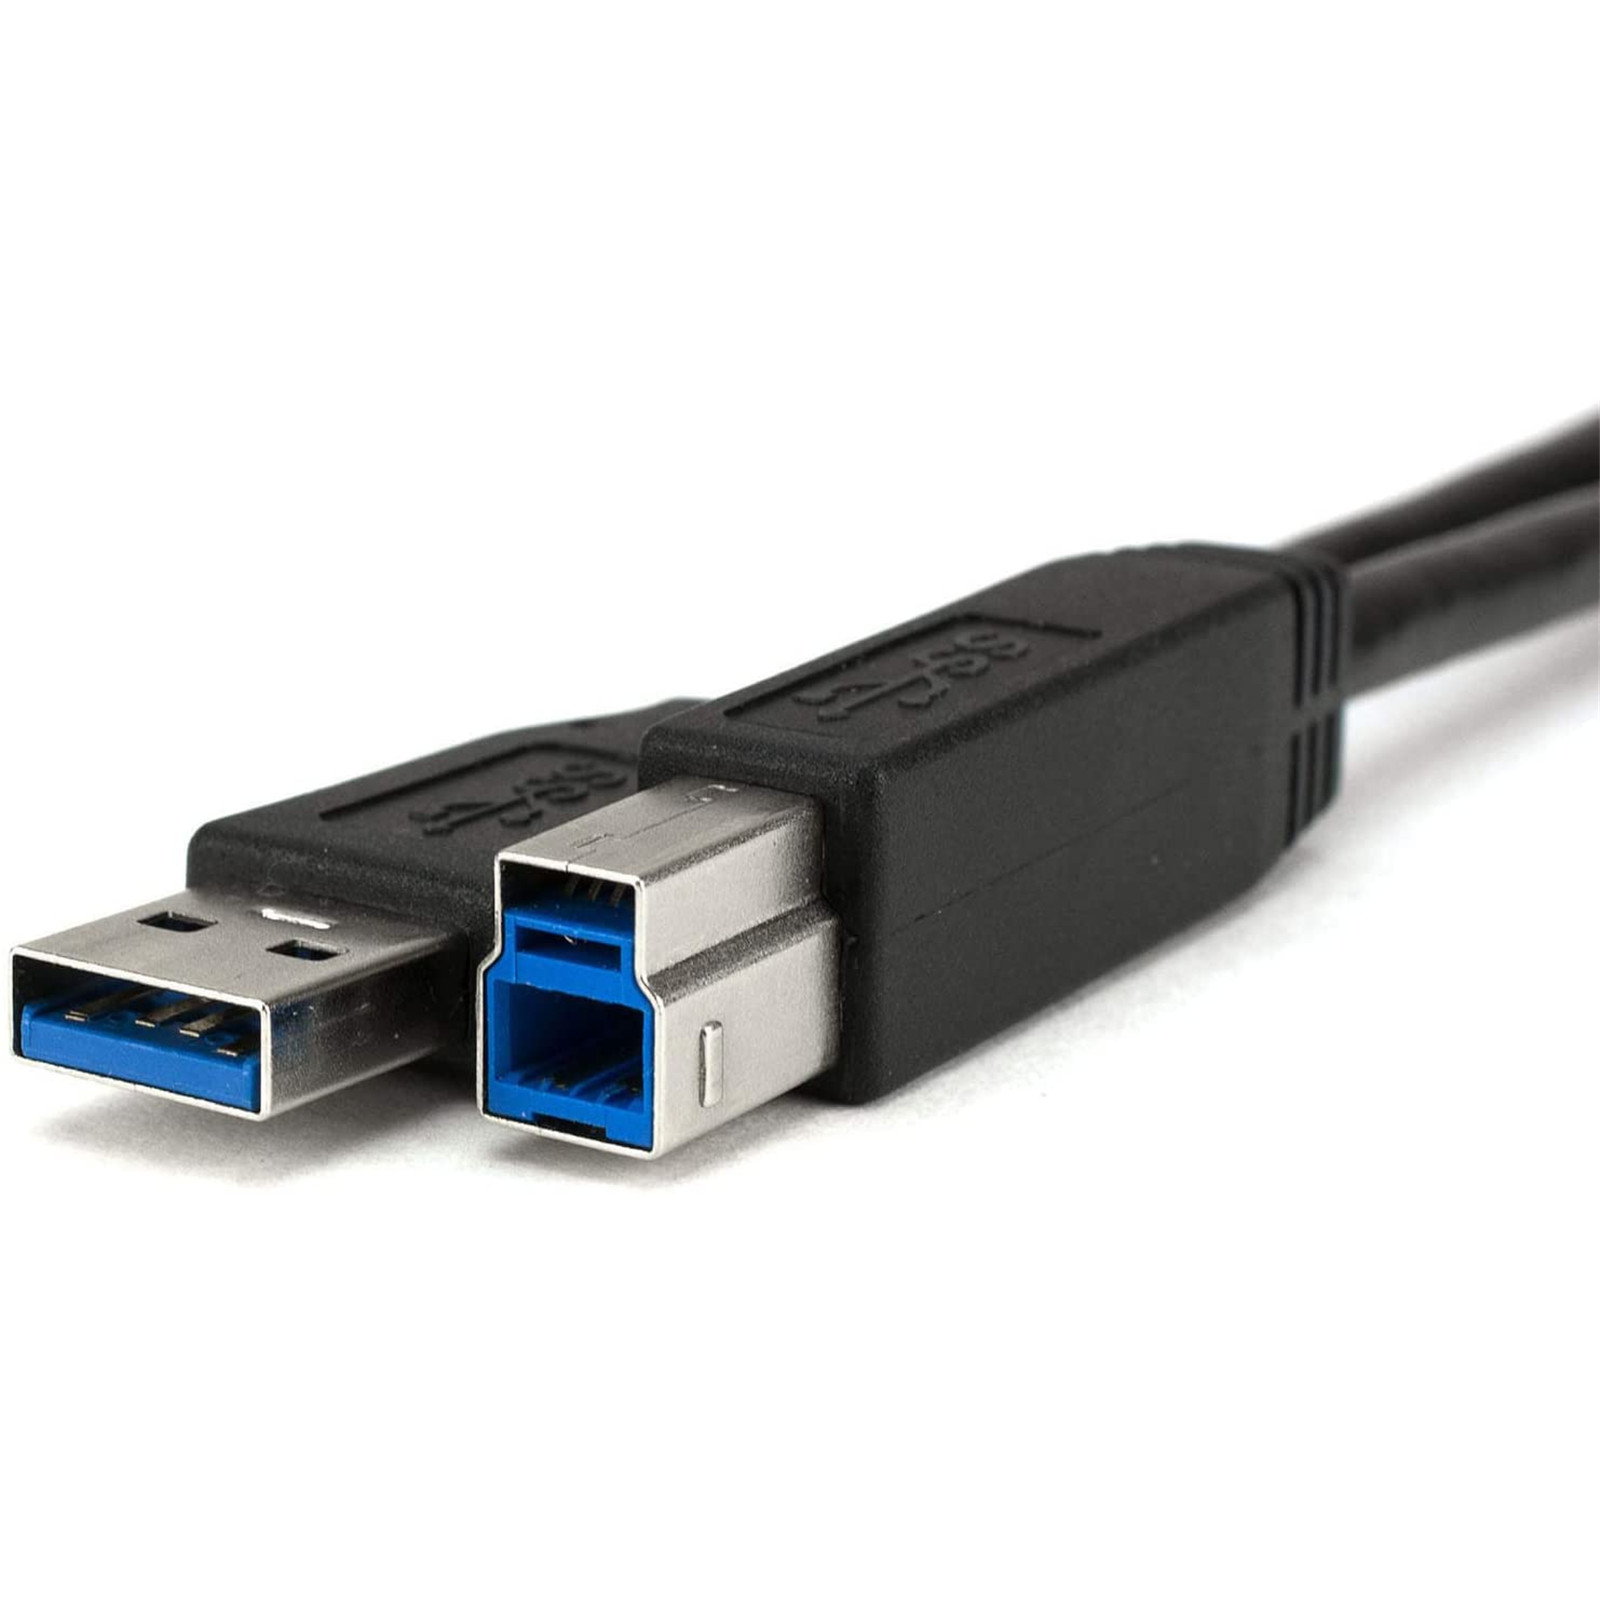 Buy the HP USB 3.0 A Male To B Male Printer Cable, Length: 1.8M, HP Part...  ( CABOEM0069 ) online - PBTech.com/pacific